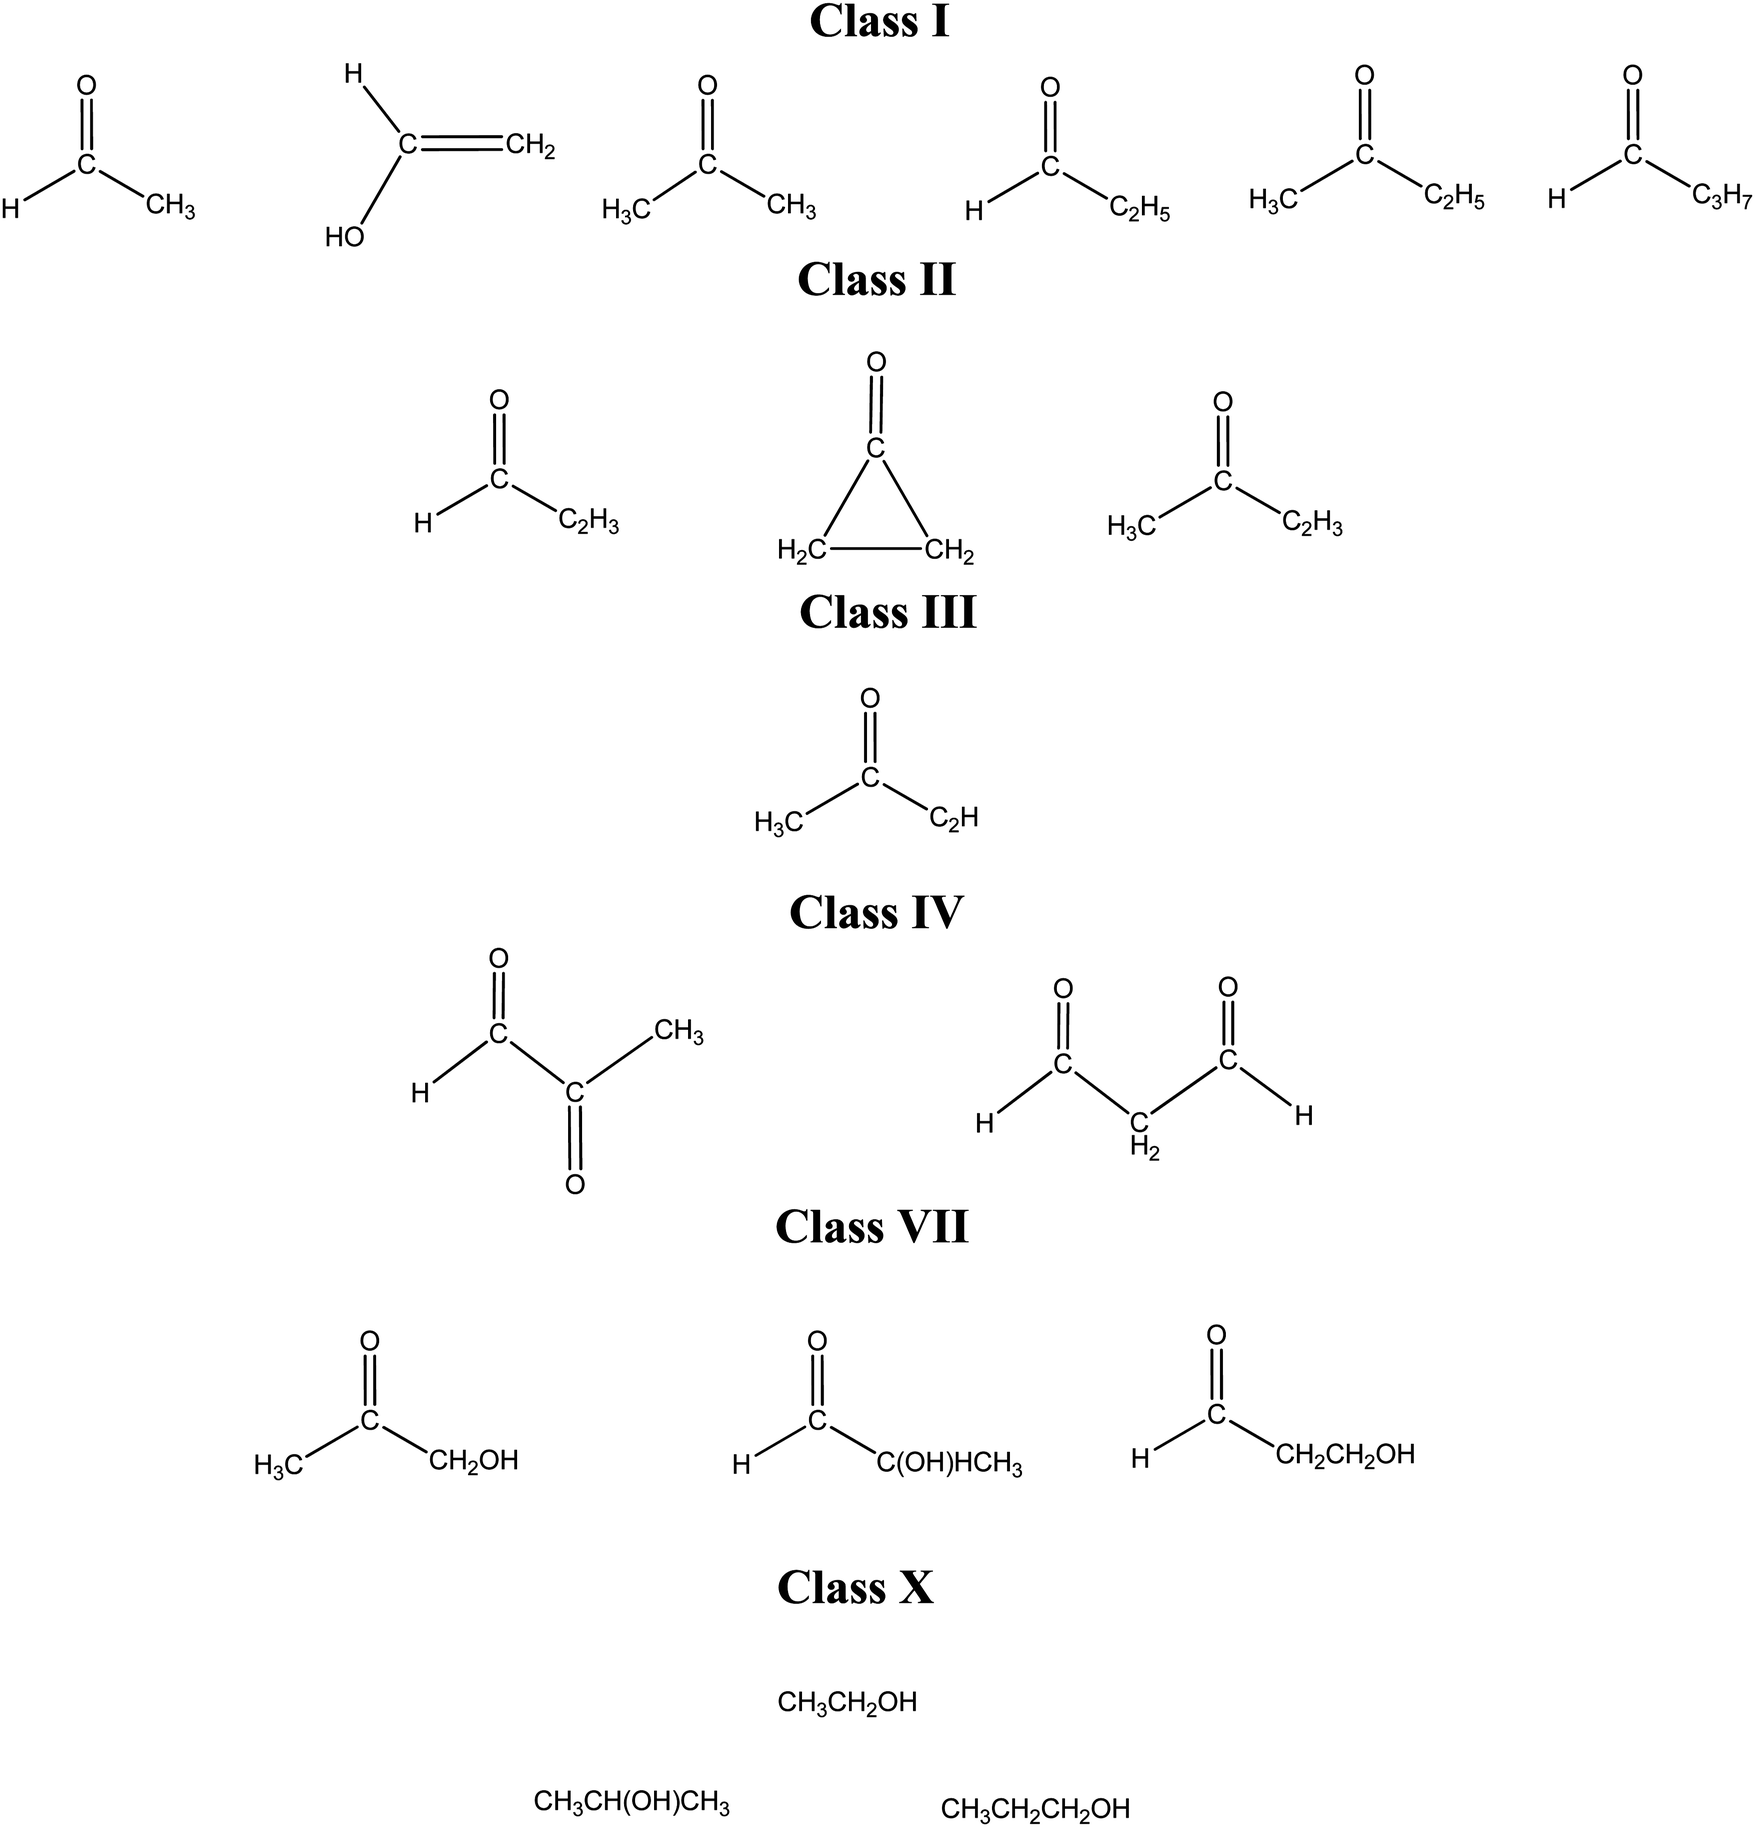 c4h8 lewis structure isomers